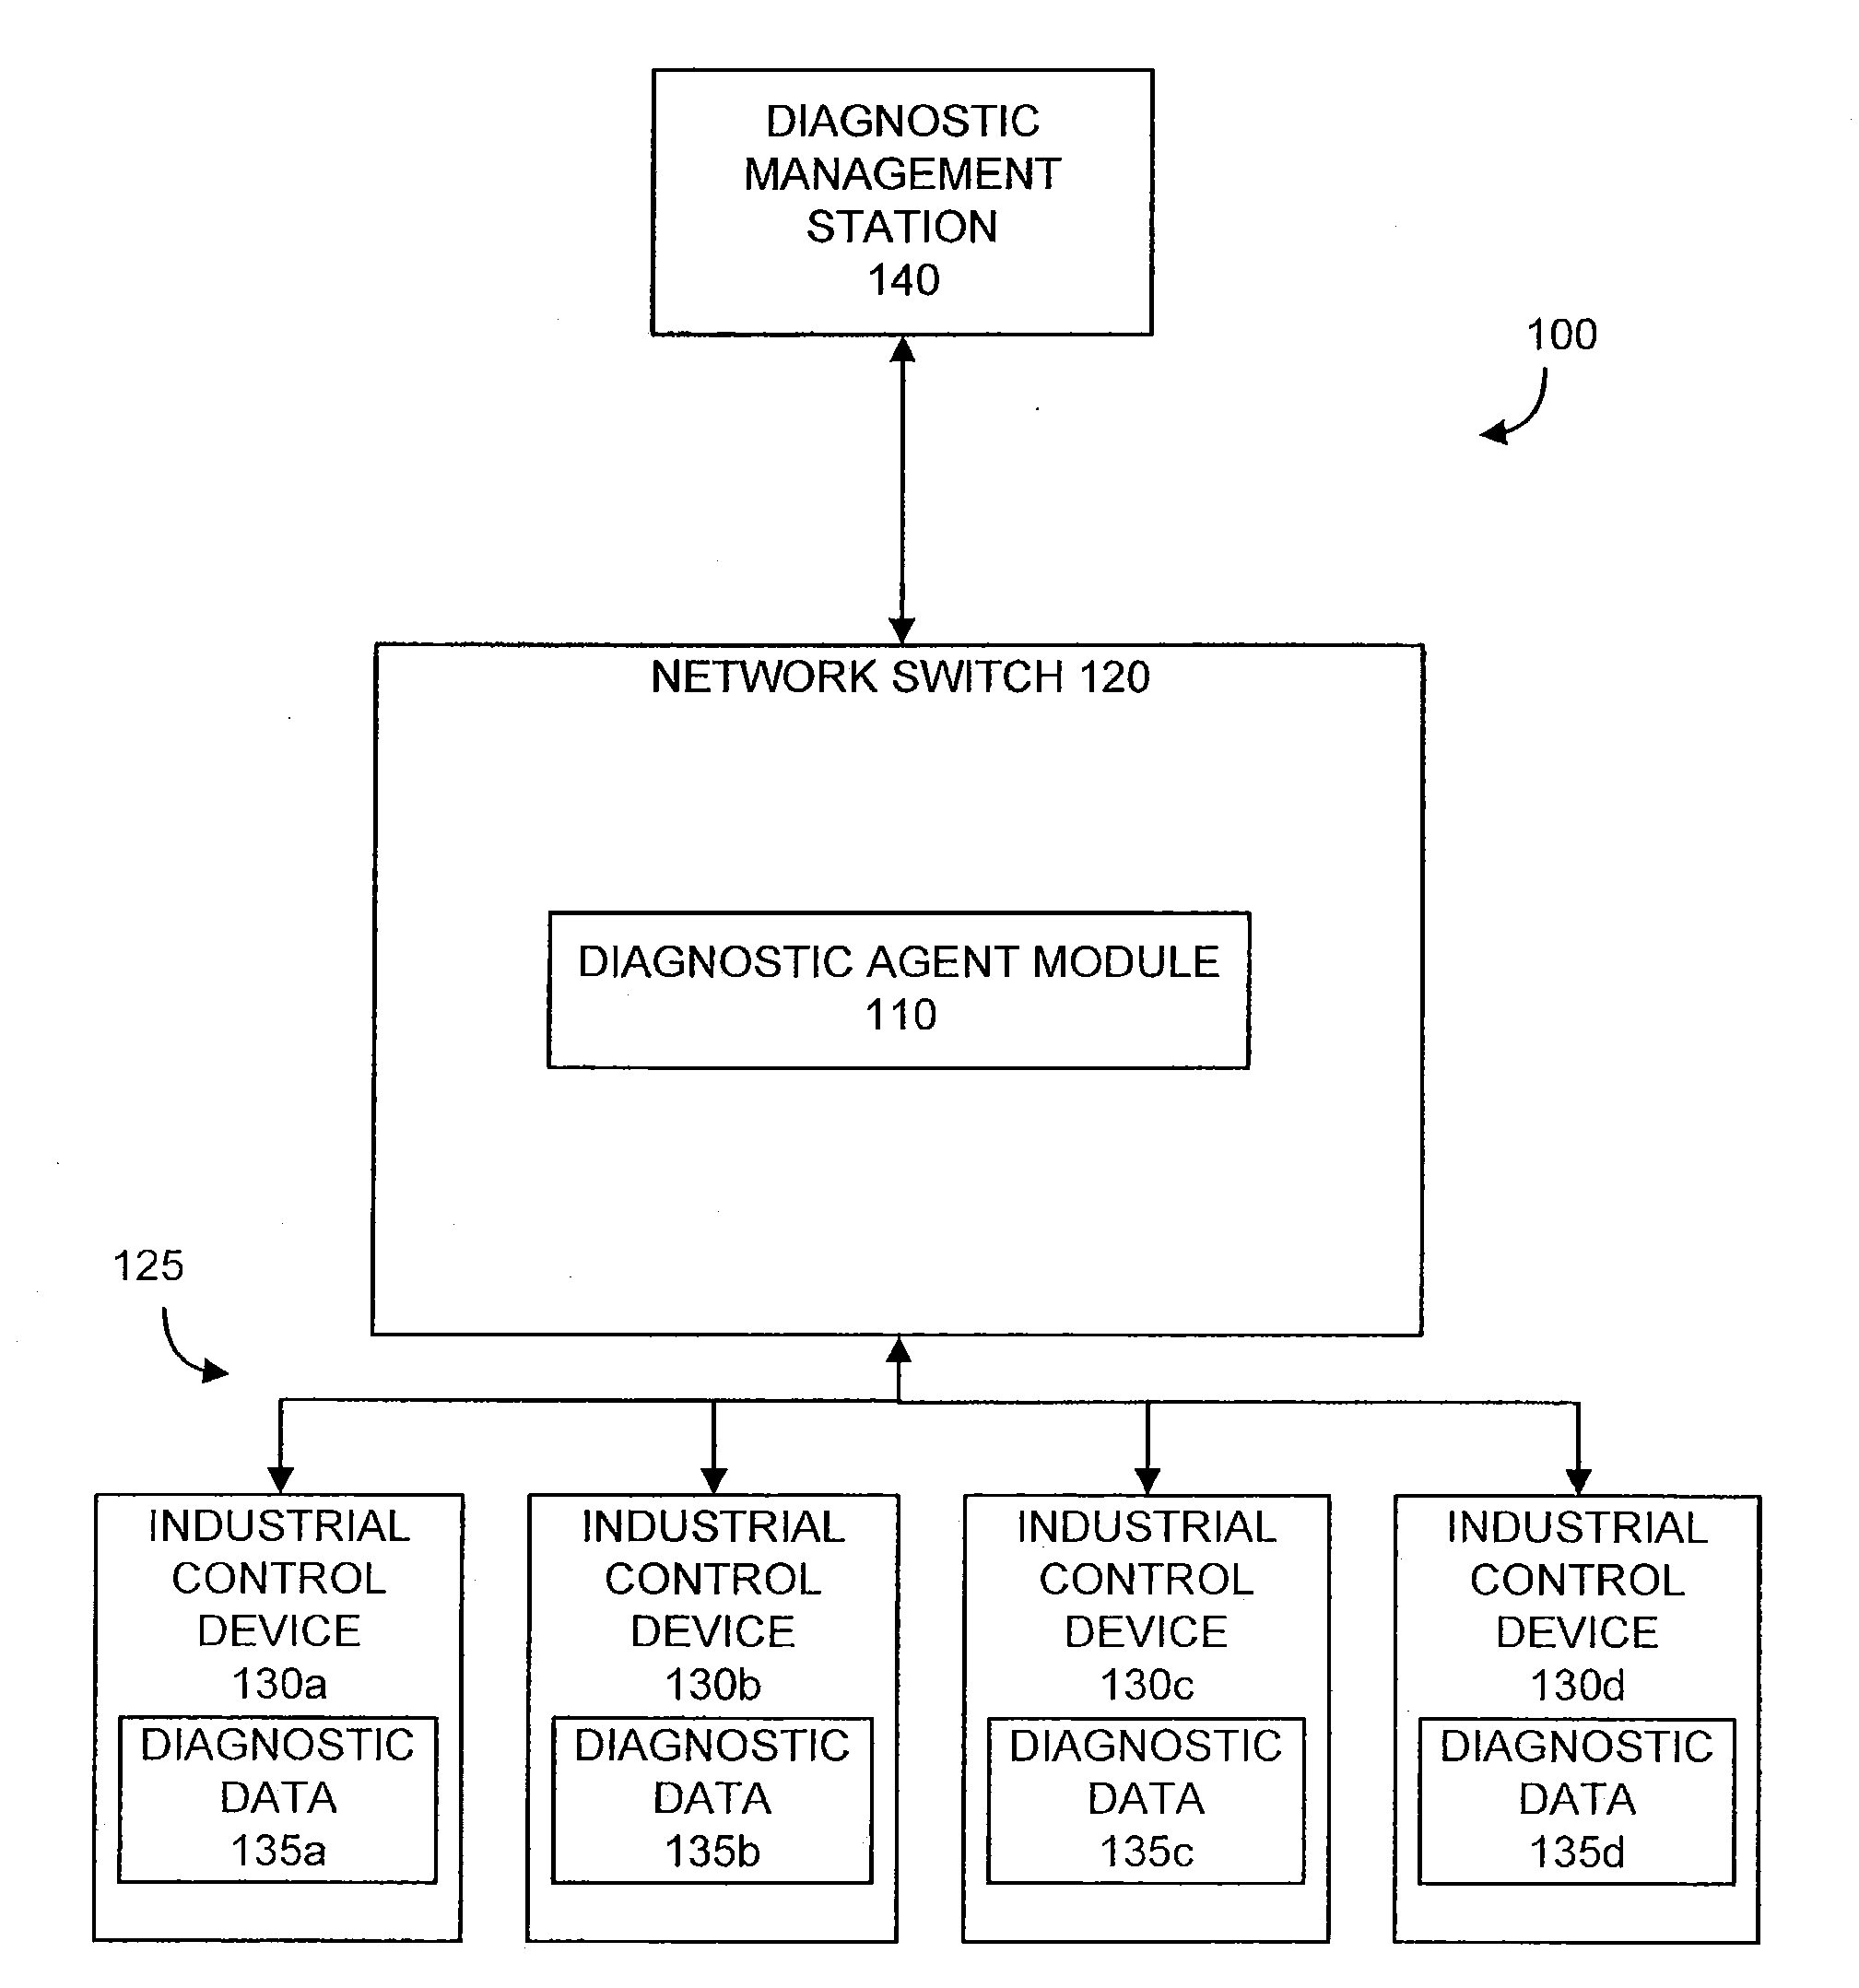 Diagnostic Module For Distributed Industrial Network Including Industrial Control Devices